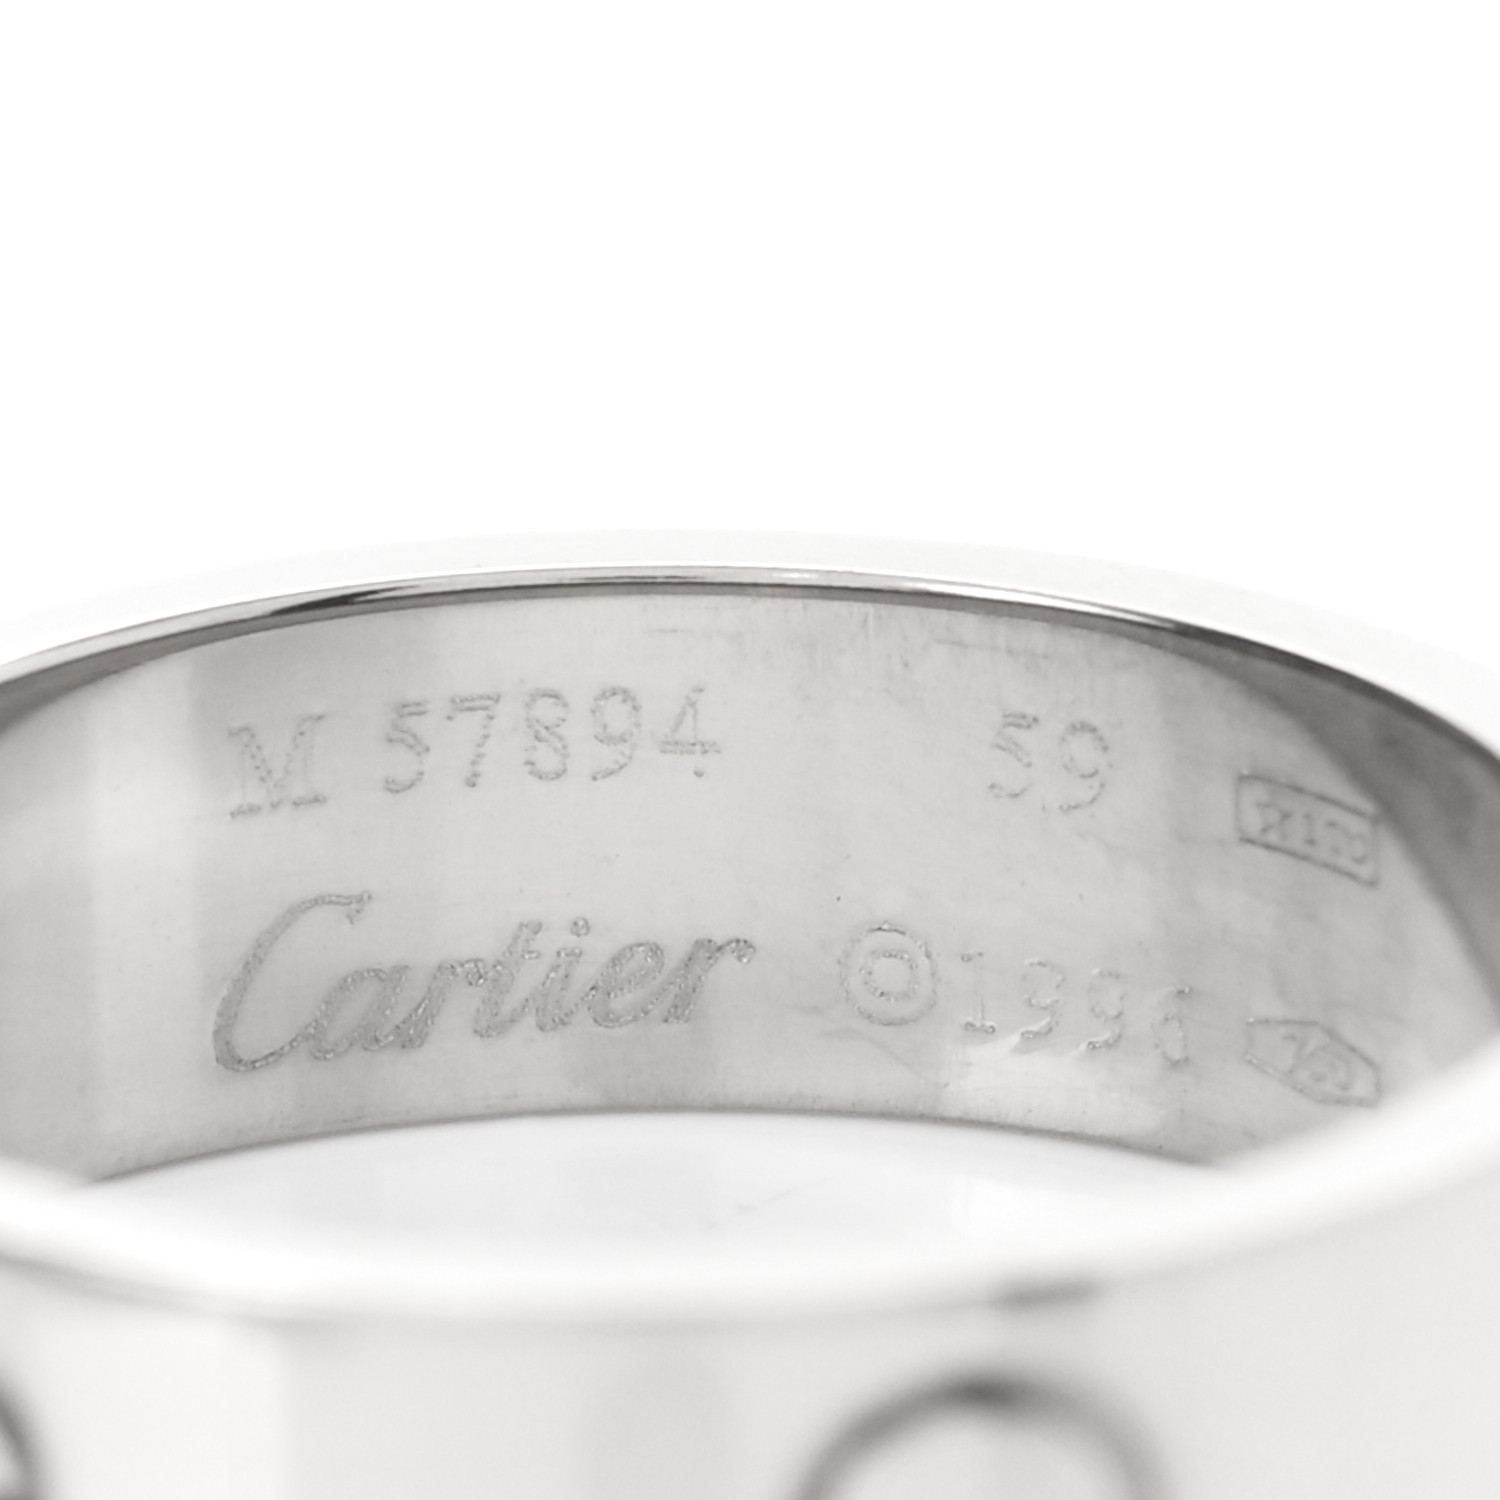 CARTIER 18K White Gold 5.5mm LOVE Ring 59 8.75 965870 | FASHIONPHILE